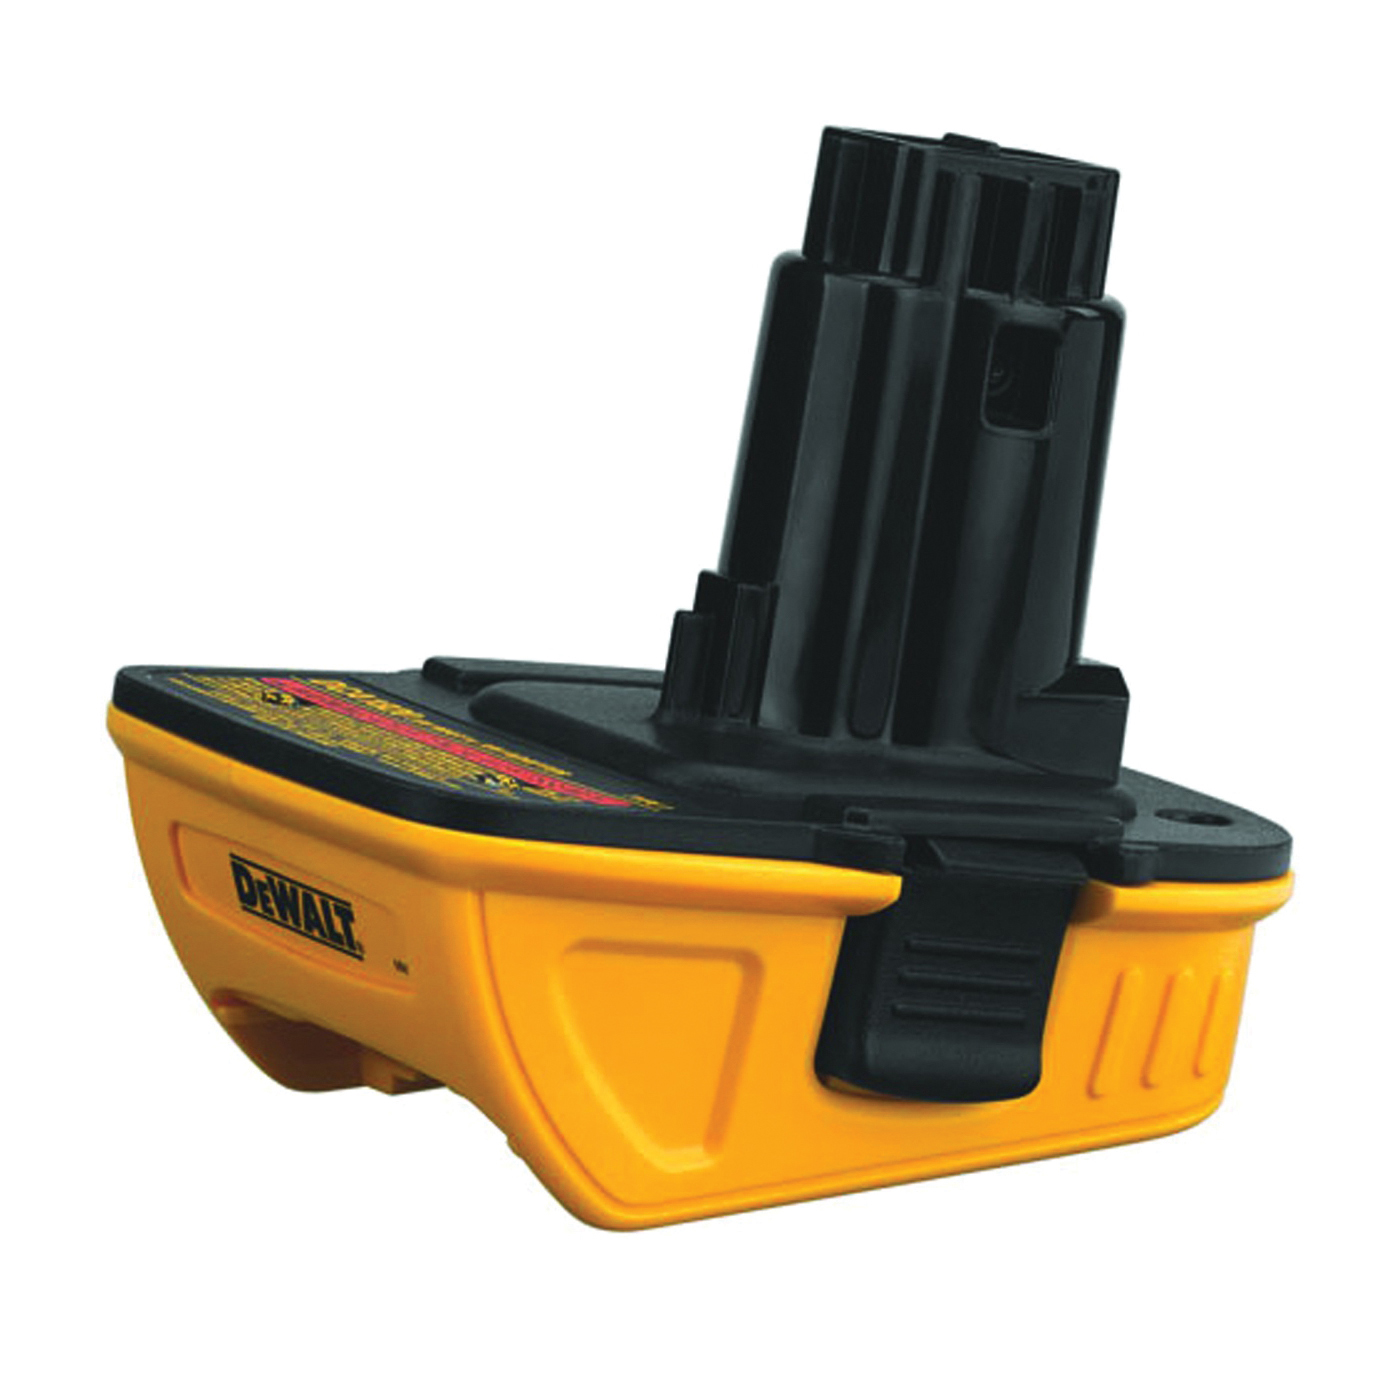 DeWALT DCA1820 Battery Adapter, 18 to 20 V Input, Battery Included: Yes, Includes: (1) 18 V to 20 V MAX Adapter - 1